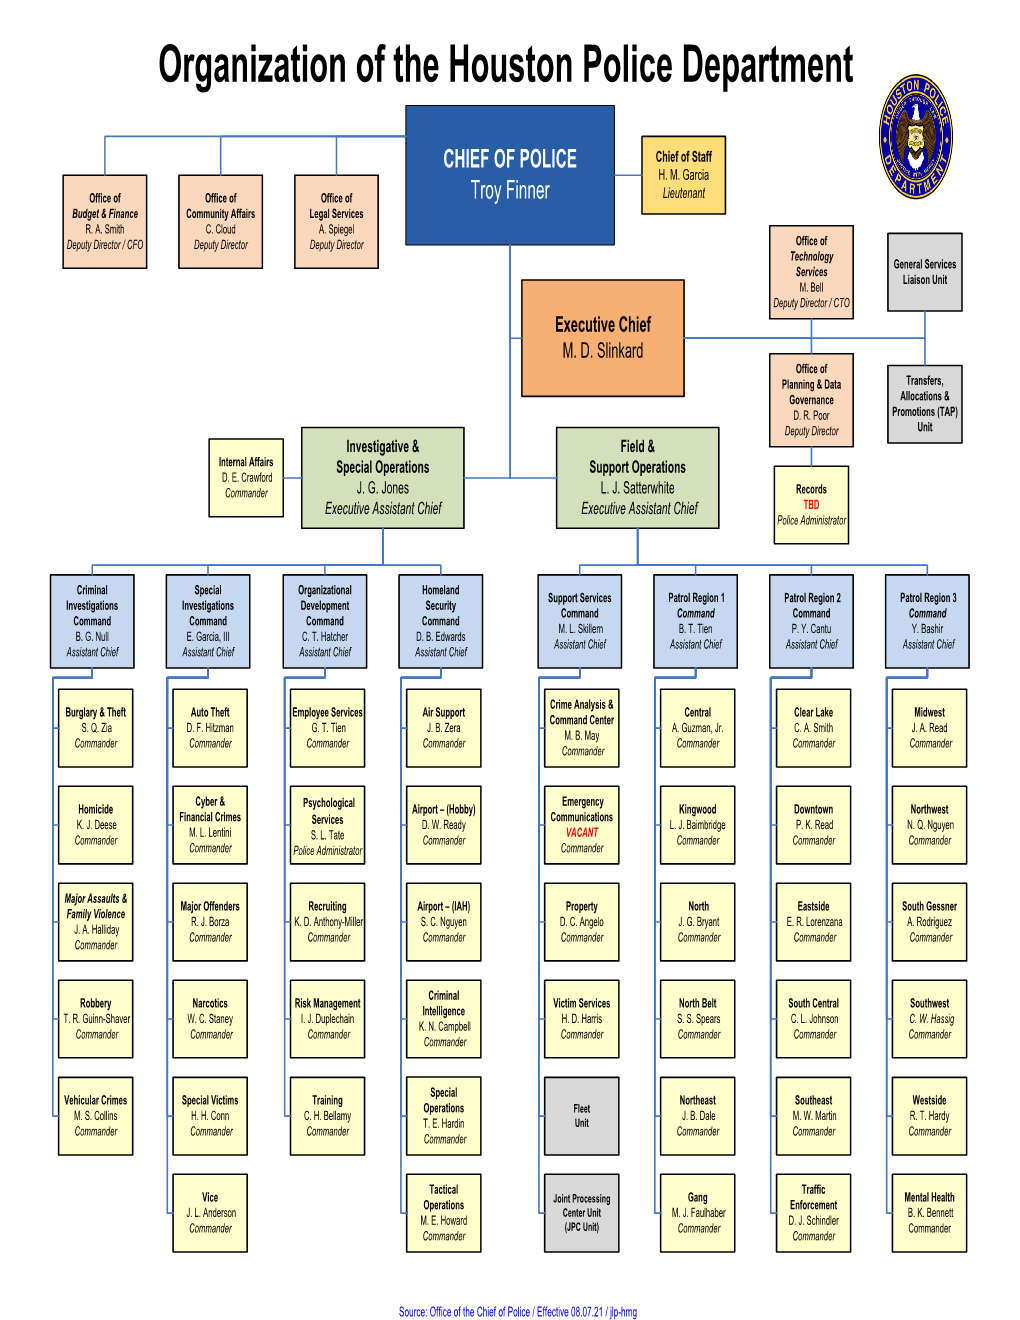 Organization of the Houston Police Department